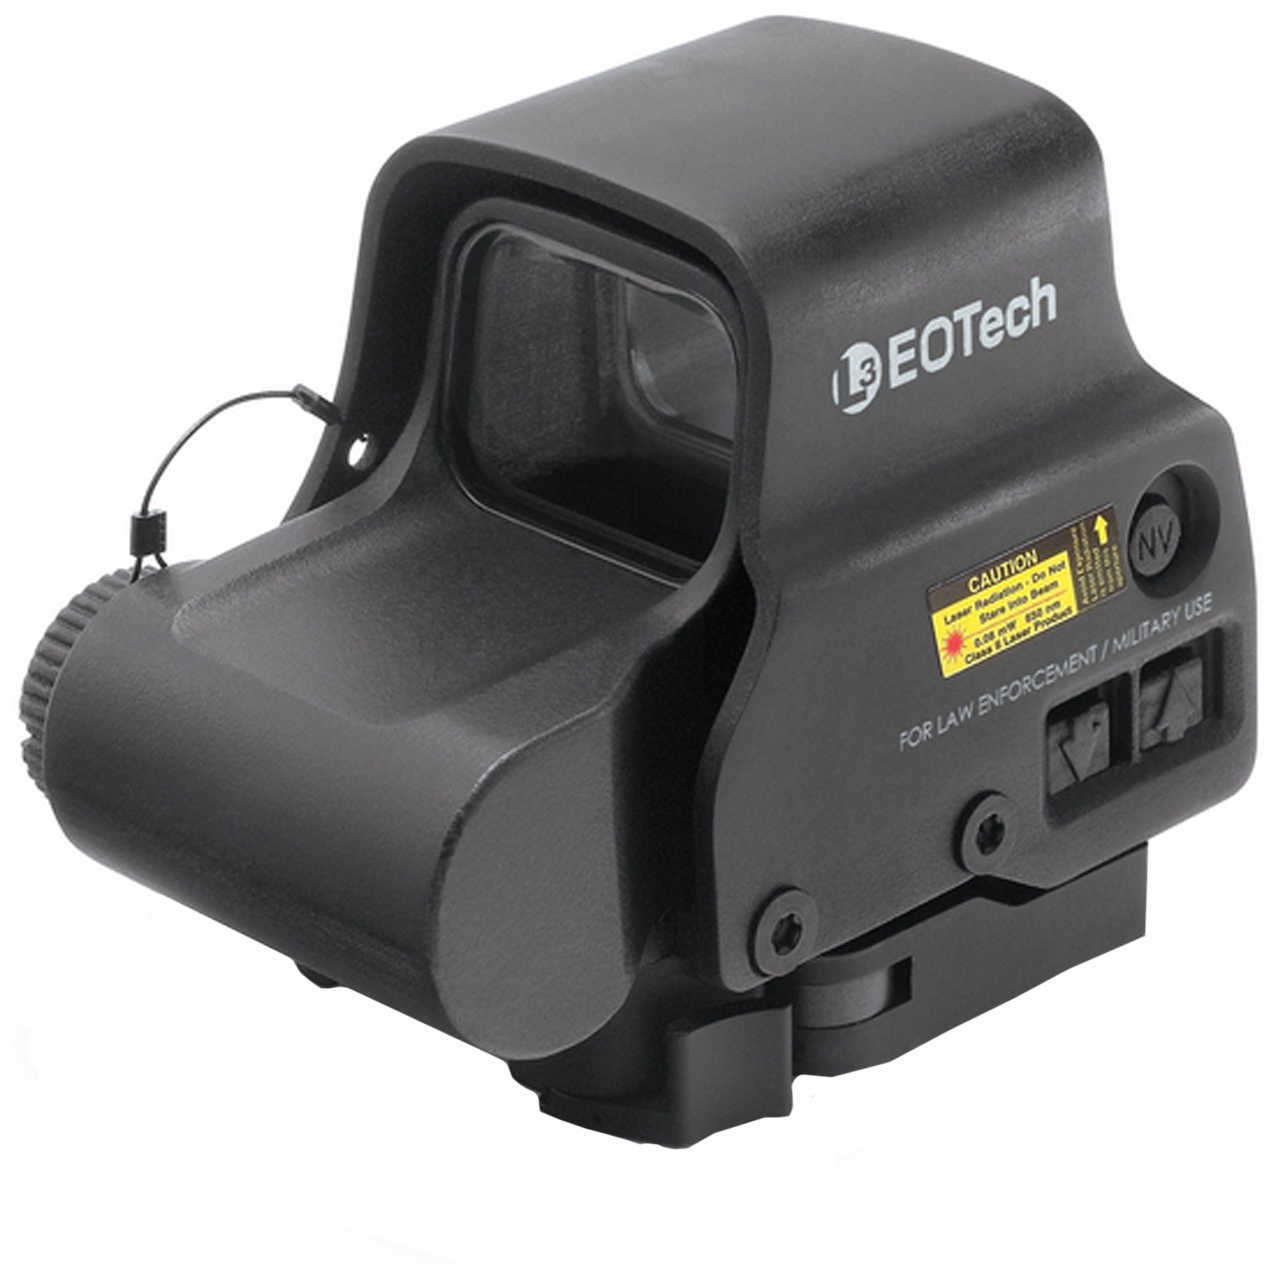 Eotech EXPS30 Holographic Weapon Sight 1x 68 MOA Ring/1 Red Dot Black CR123A Lithium (1)